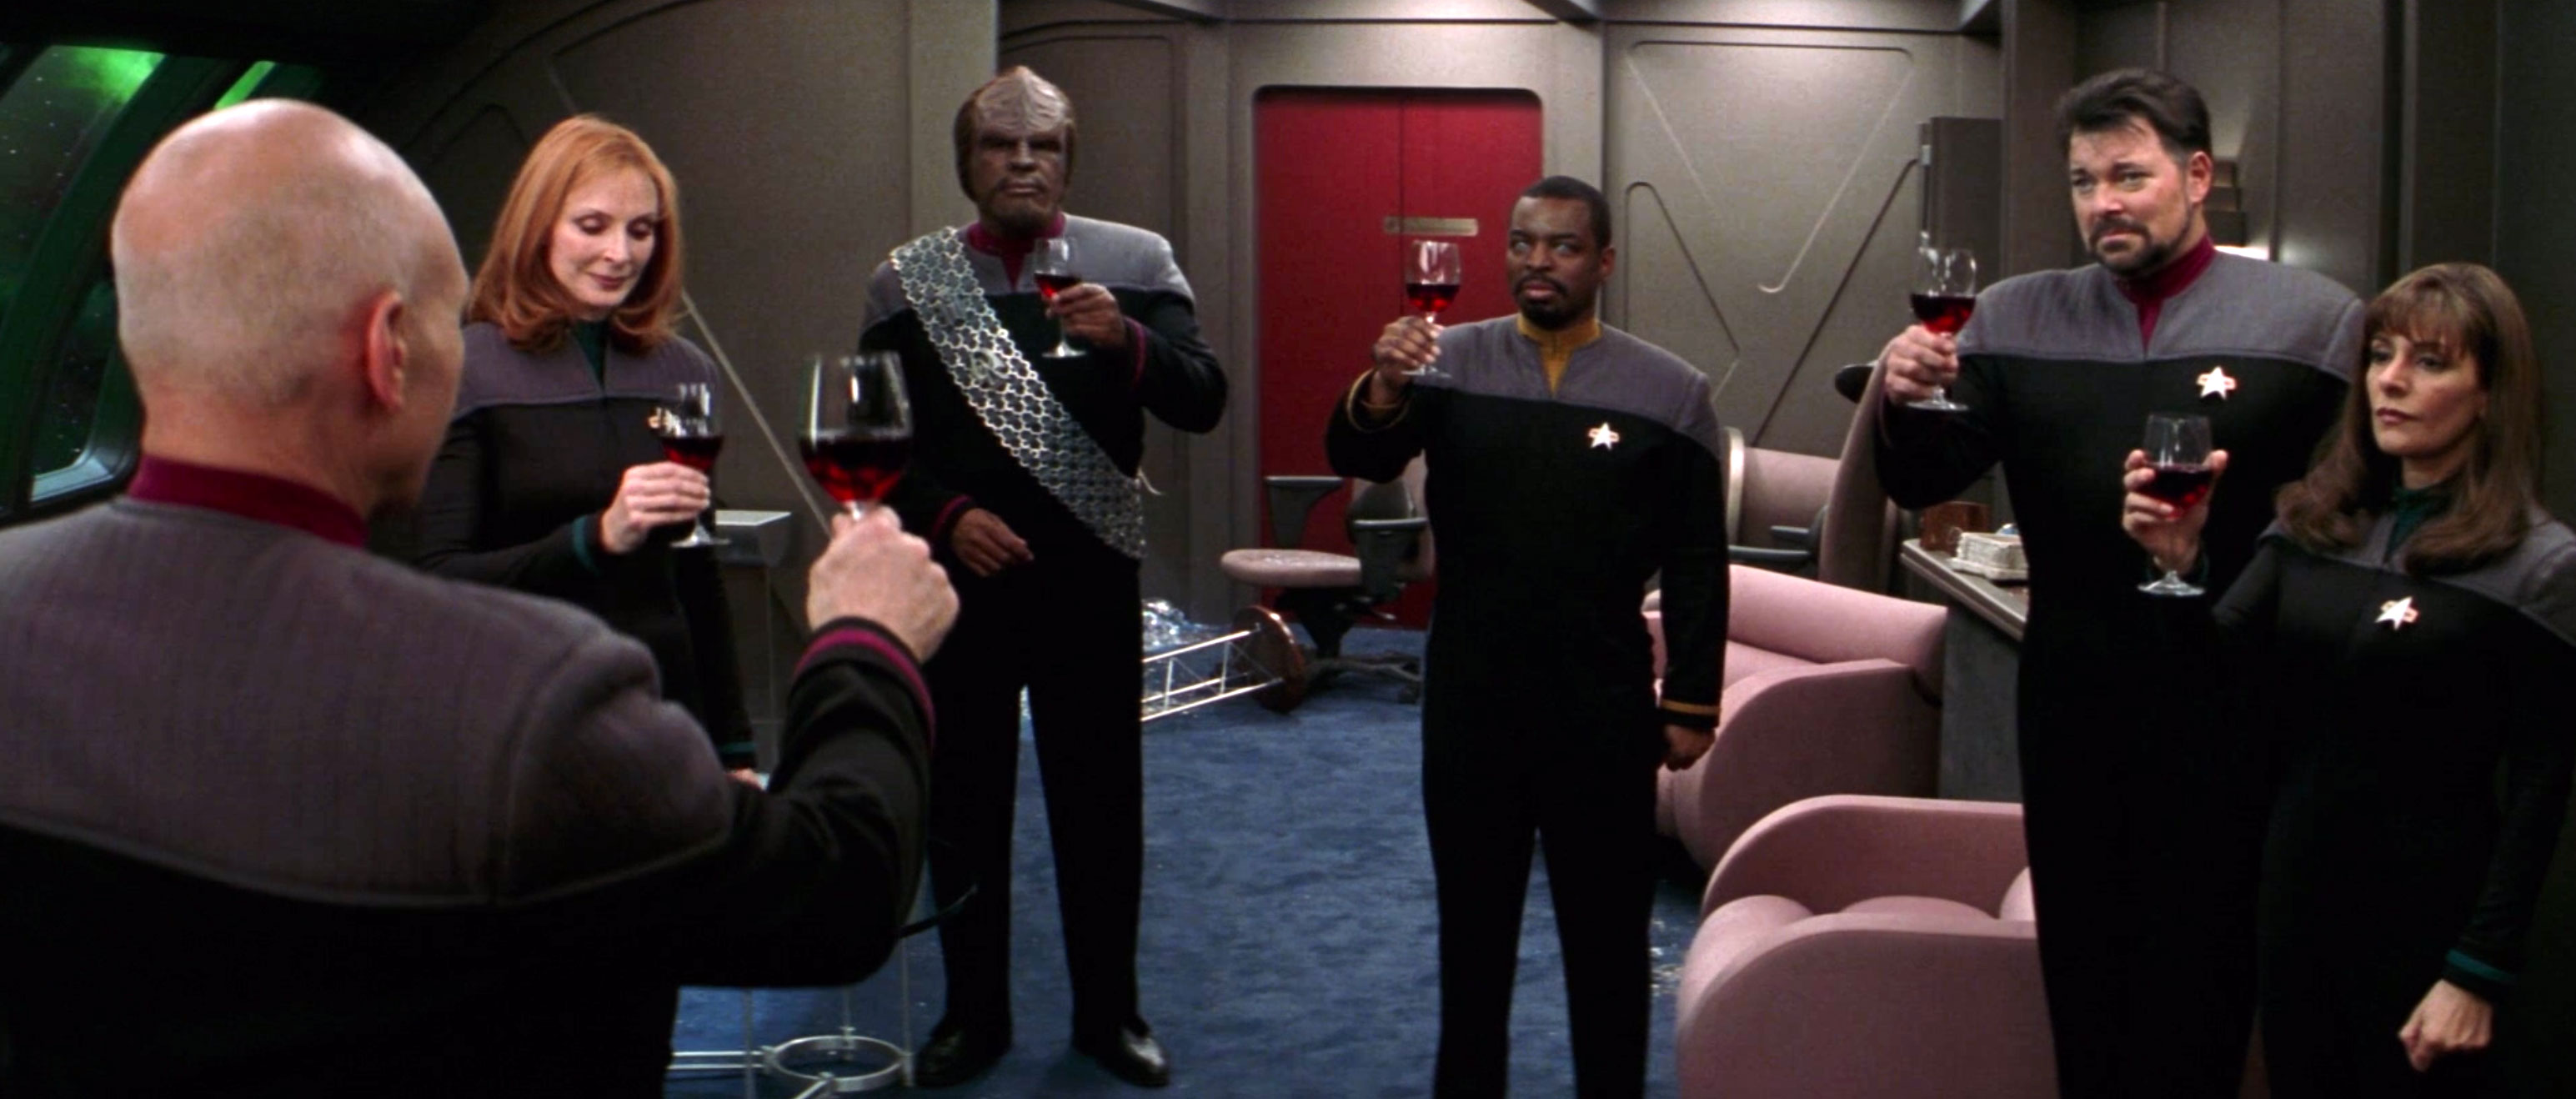 “To absent friends.” Picard leads a toast after Data sacrifices himself in Star Trek: Nemesis